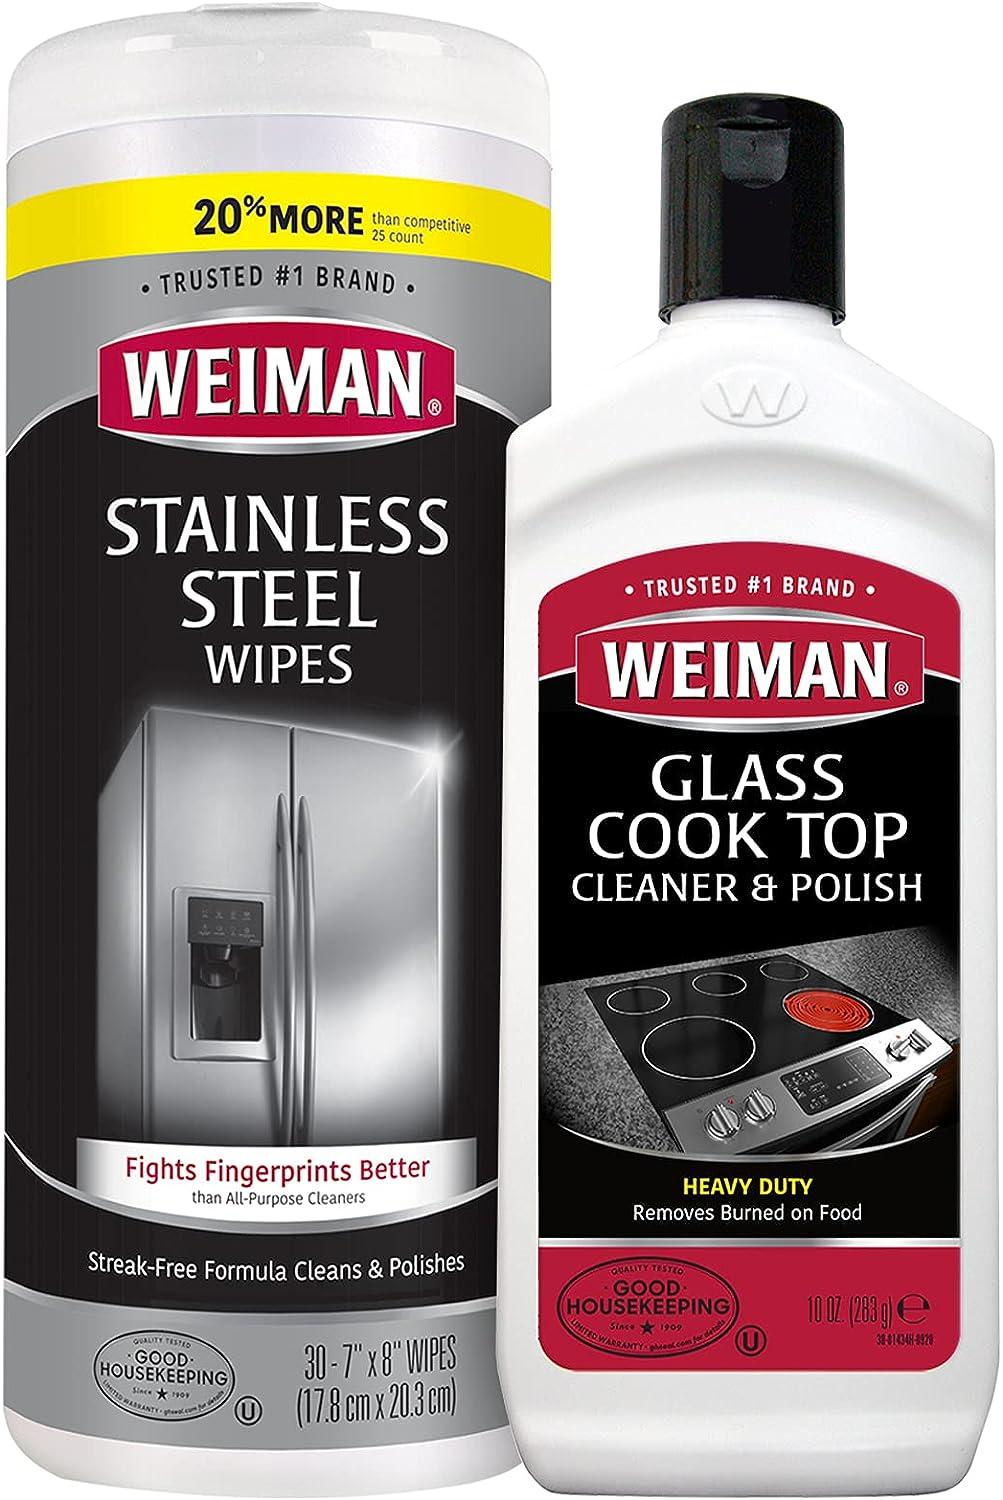 Weiman Stainless Steel Wipes 